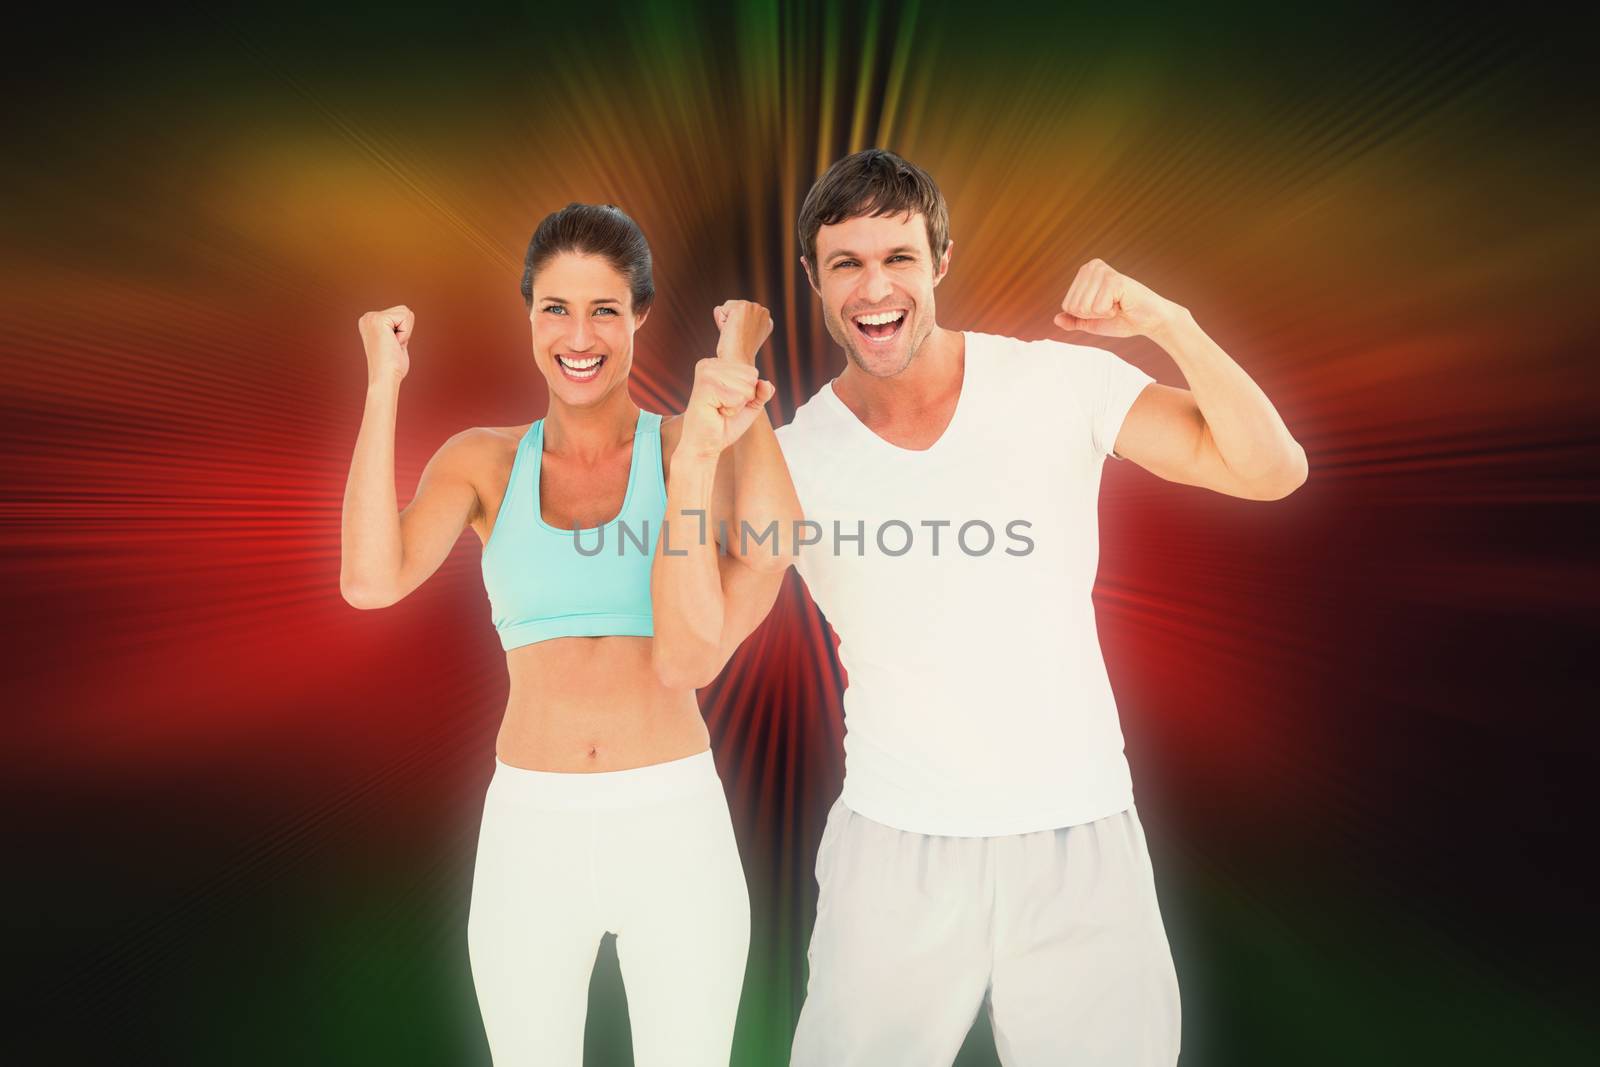 Cheerful fit couple clenching fists against abstract background